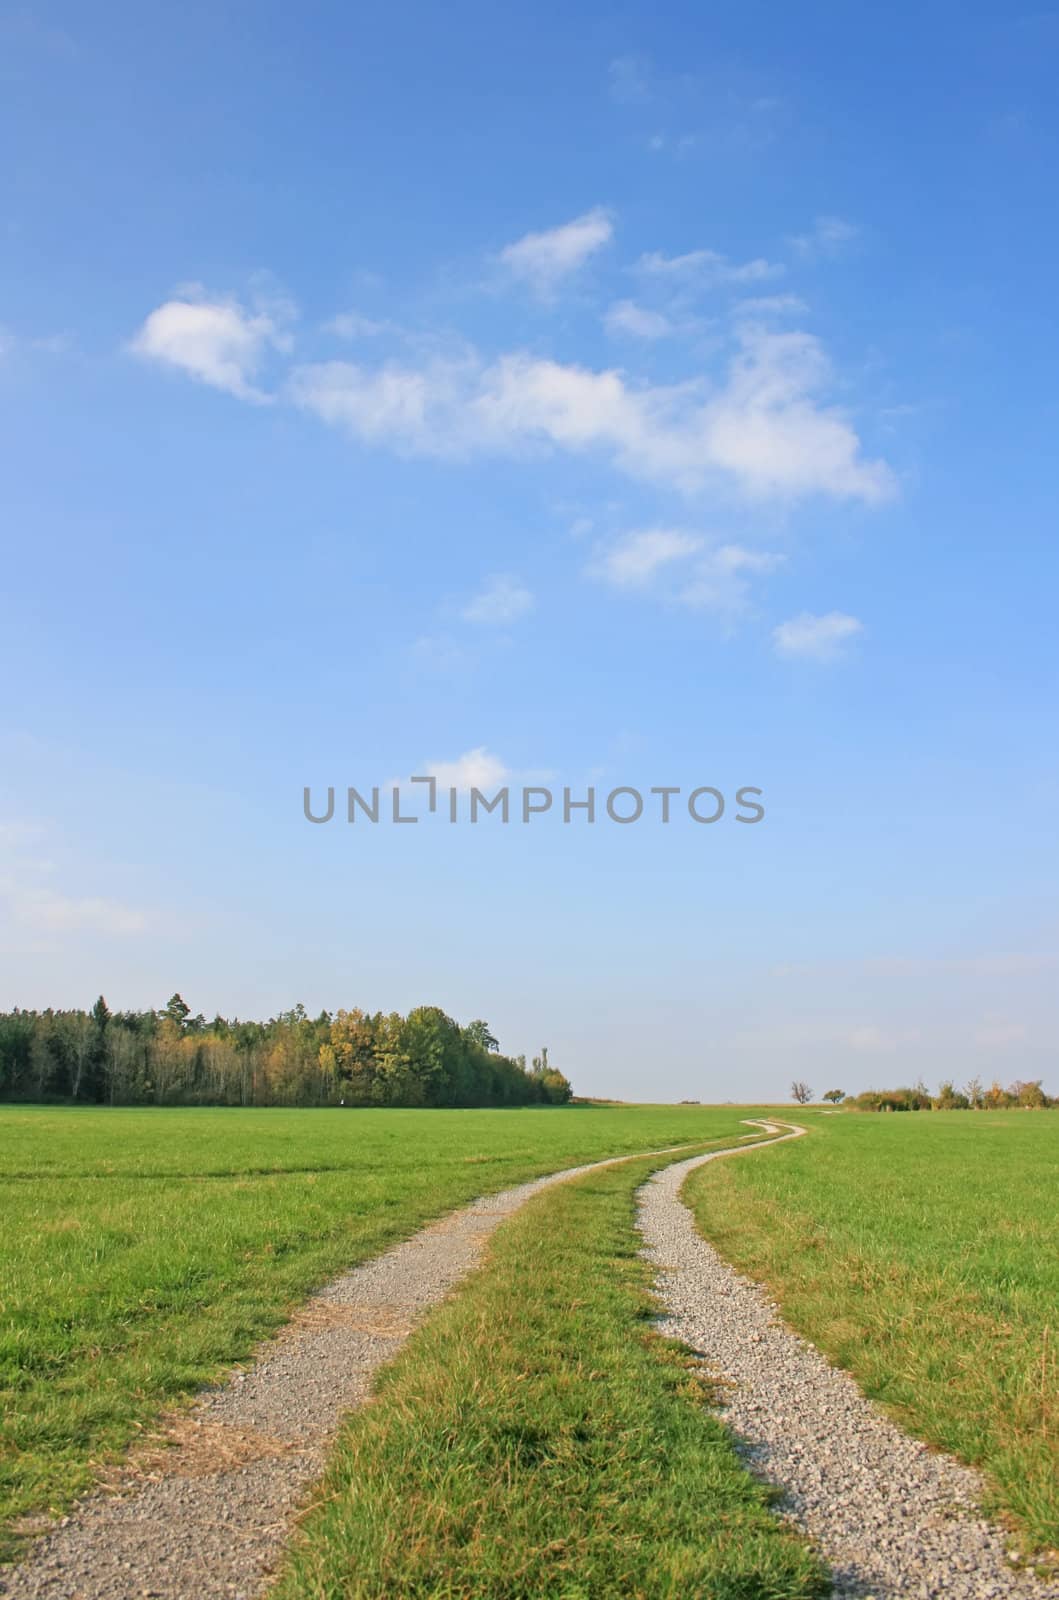 This image shows a country road with sky and clouds